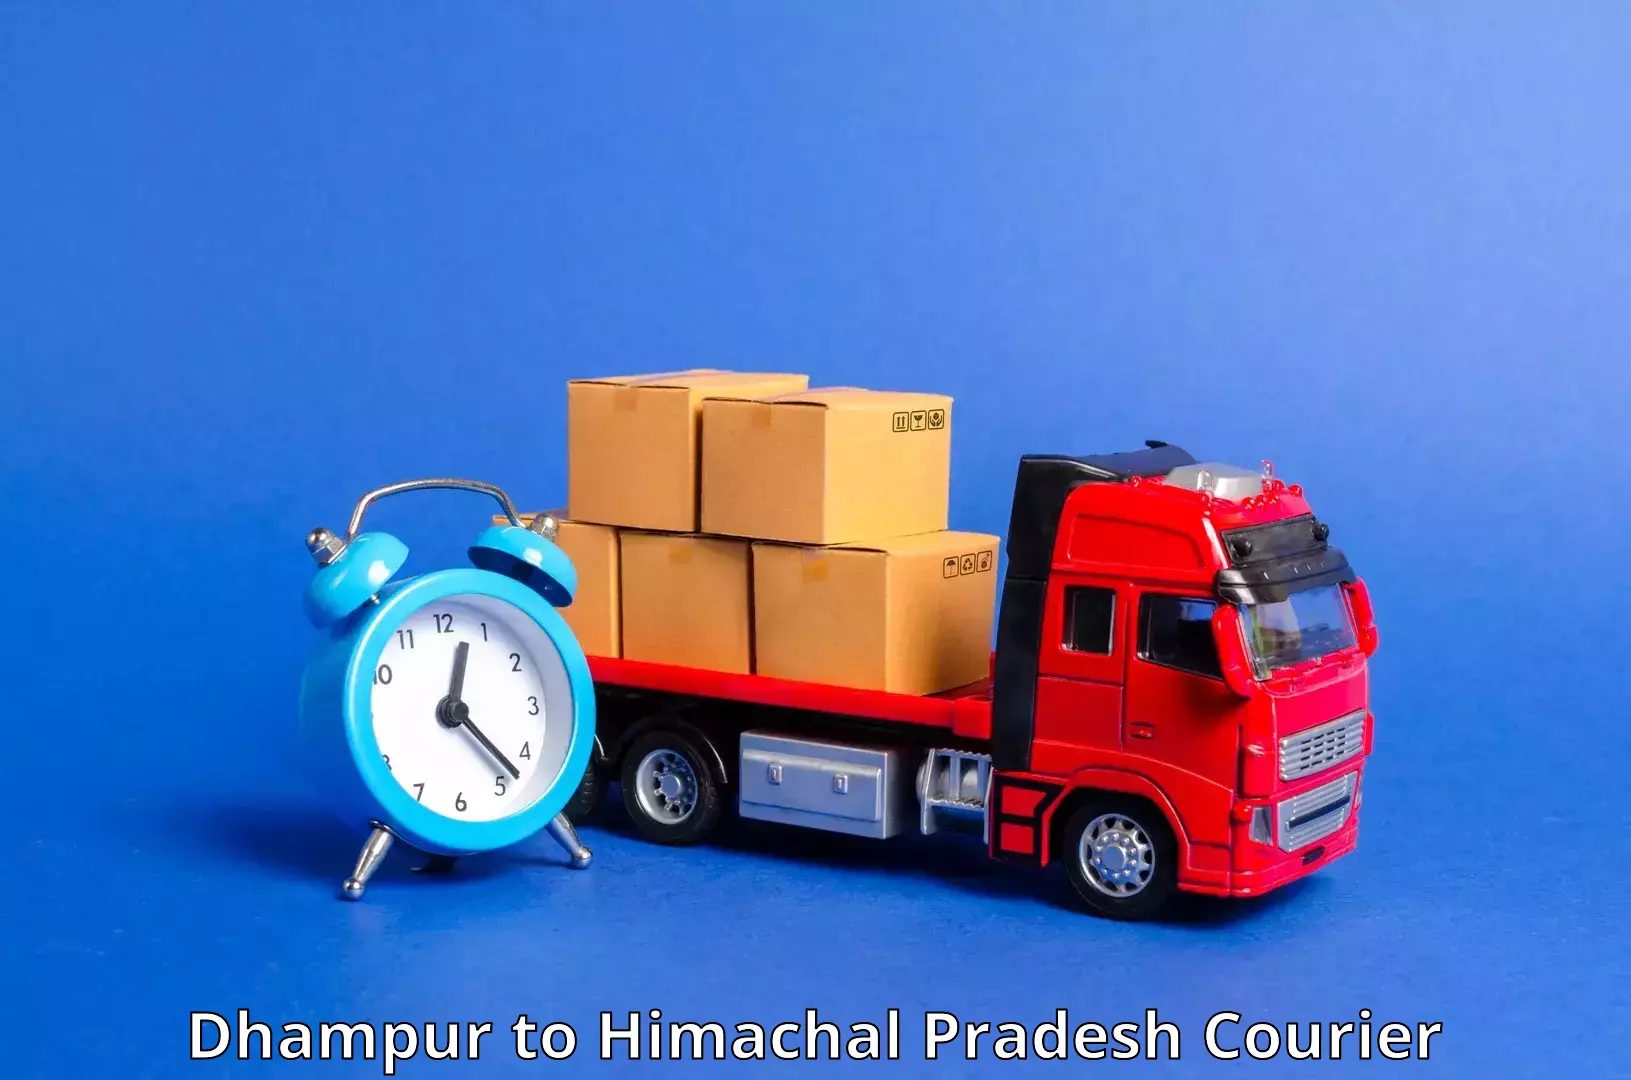 Specialized courier services in Dhampur to Bilaspur Himachal Pradesh